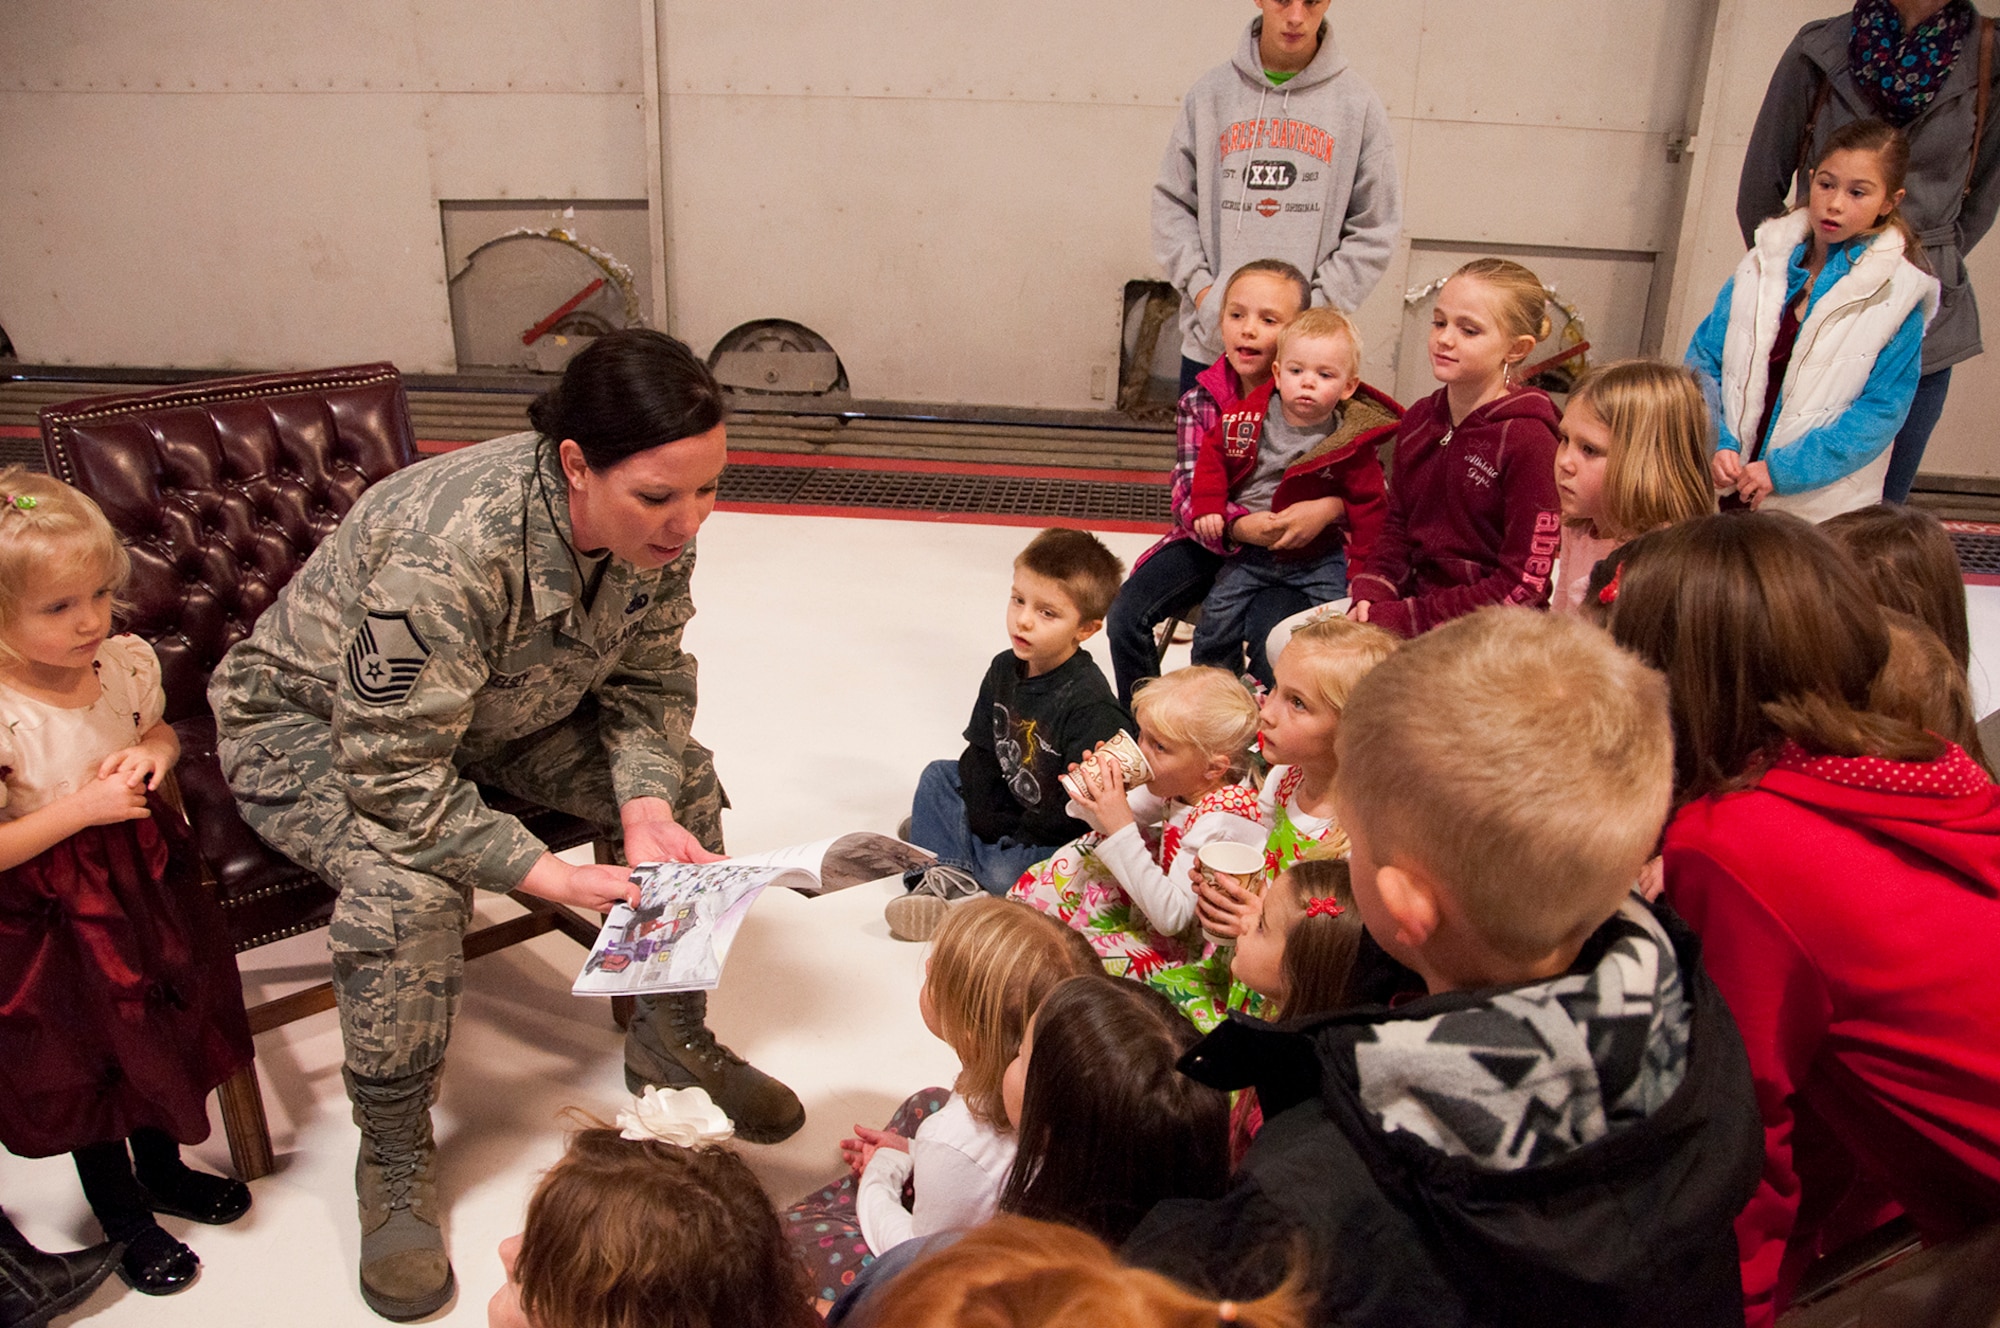 Master Sgt. Angelia Kelsey, 419th Logistics Readiness Squadron, reads Molly’s Christmas Wish, a book she wrote and self-published, to reservists’ children during the 419th Fighter Wing’s Christmas party here Dec. 2. Kelsey is a maintenance supply liaison and has traveled around the world as part of her military duties, having served for more than 11 years. Before joining the 419th, Kelsey was stationed at Joint Base Elmendorf-Richardson, Alaska – a setting that inspired the new book. She is currently visiting schools across Northern Utah to promote the book. (U.S. Air Force photo/Senior Airman Crystal Charriere)